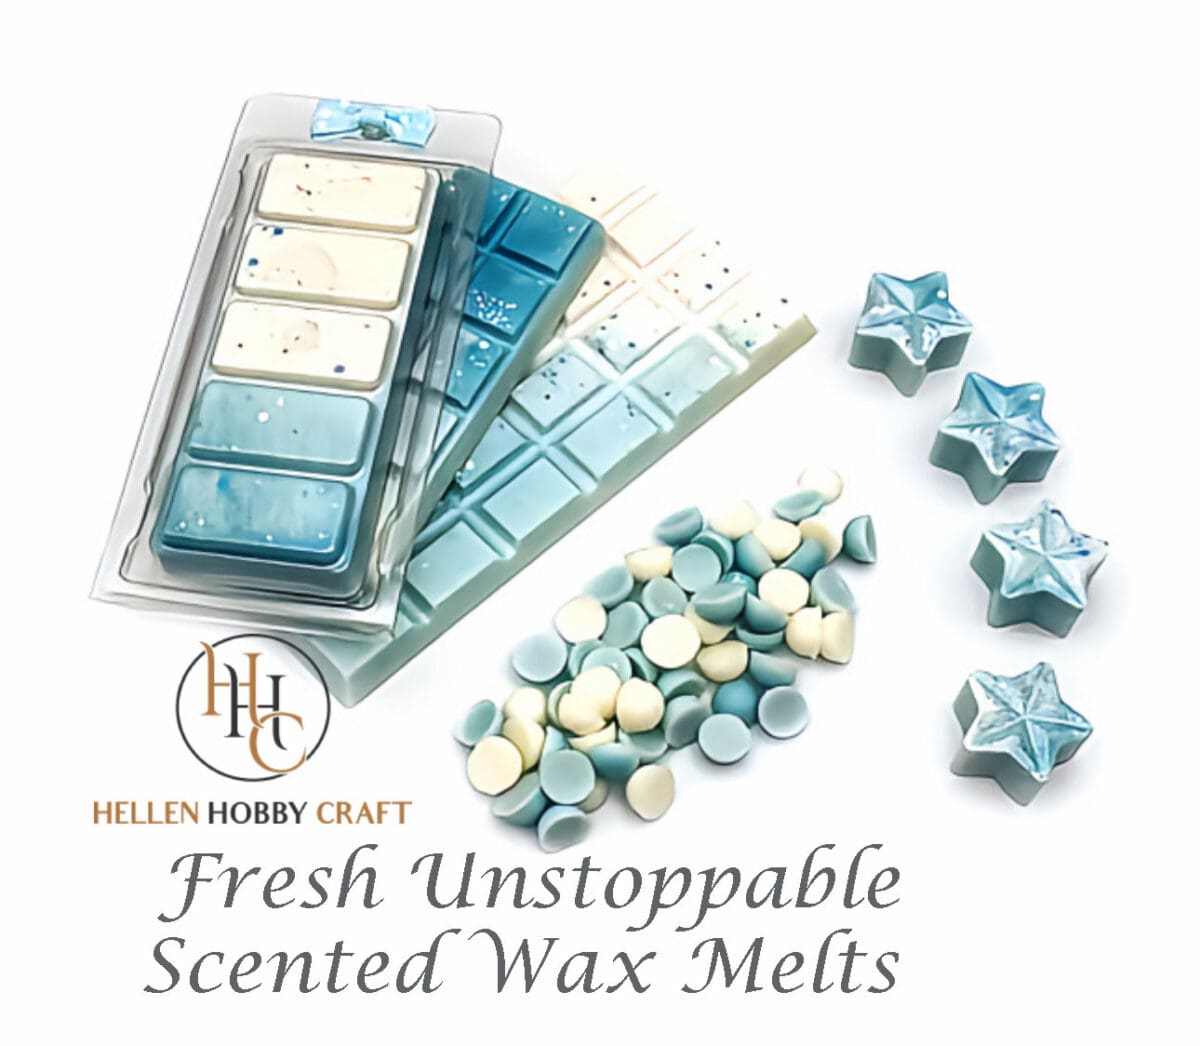 Fresh Unstoppable Highly Scented Wax Melts